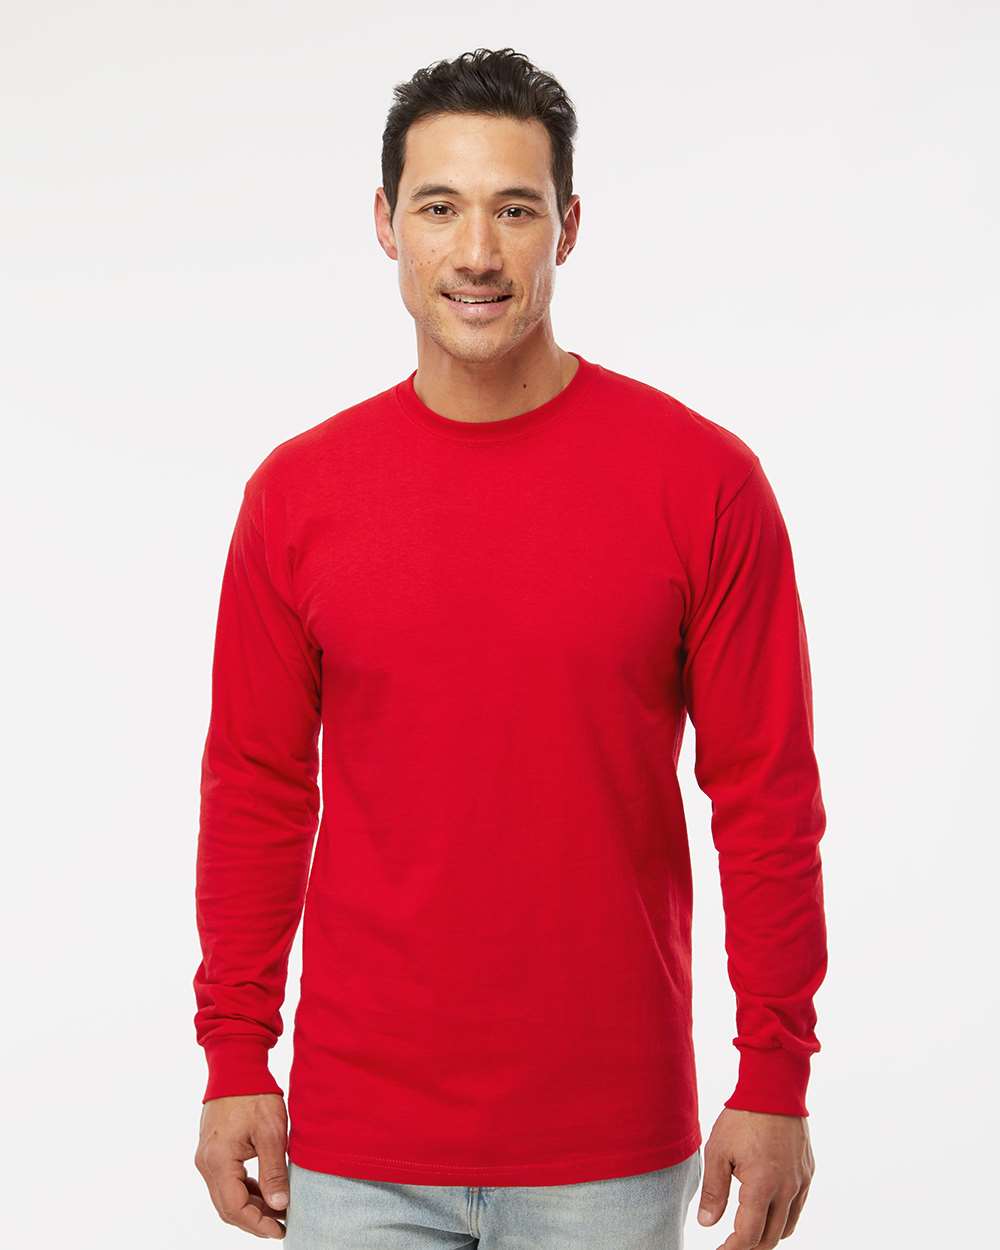 M&O Gold Soft Touch Long Sleeve T-Shirt 4820 #colormdl_Deep Red